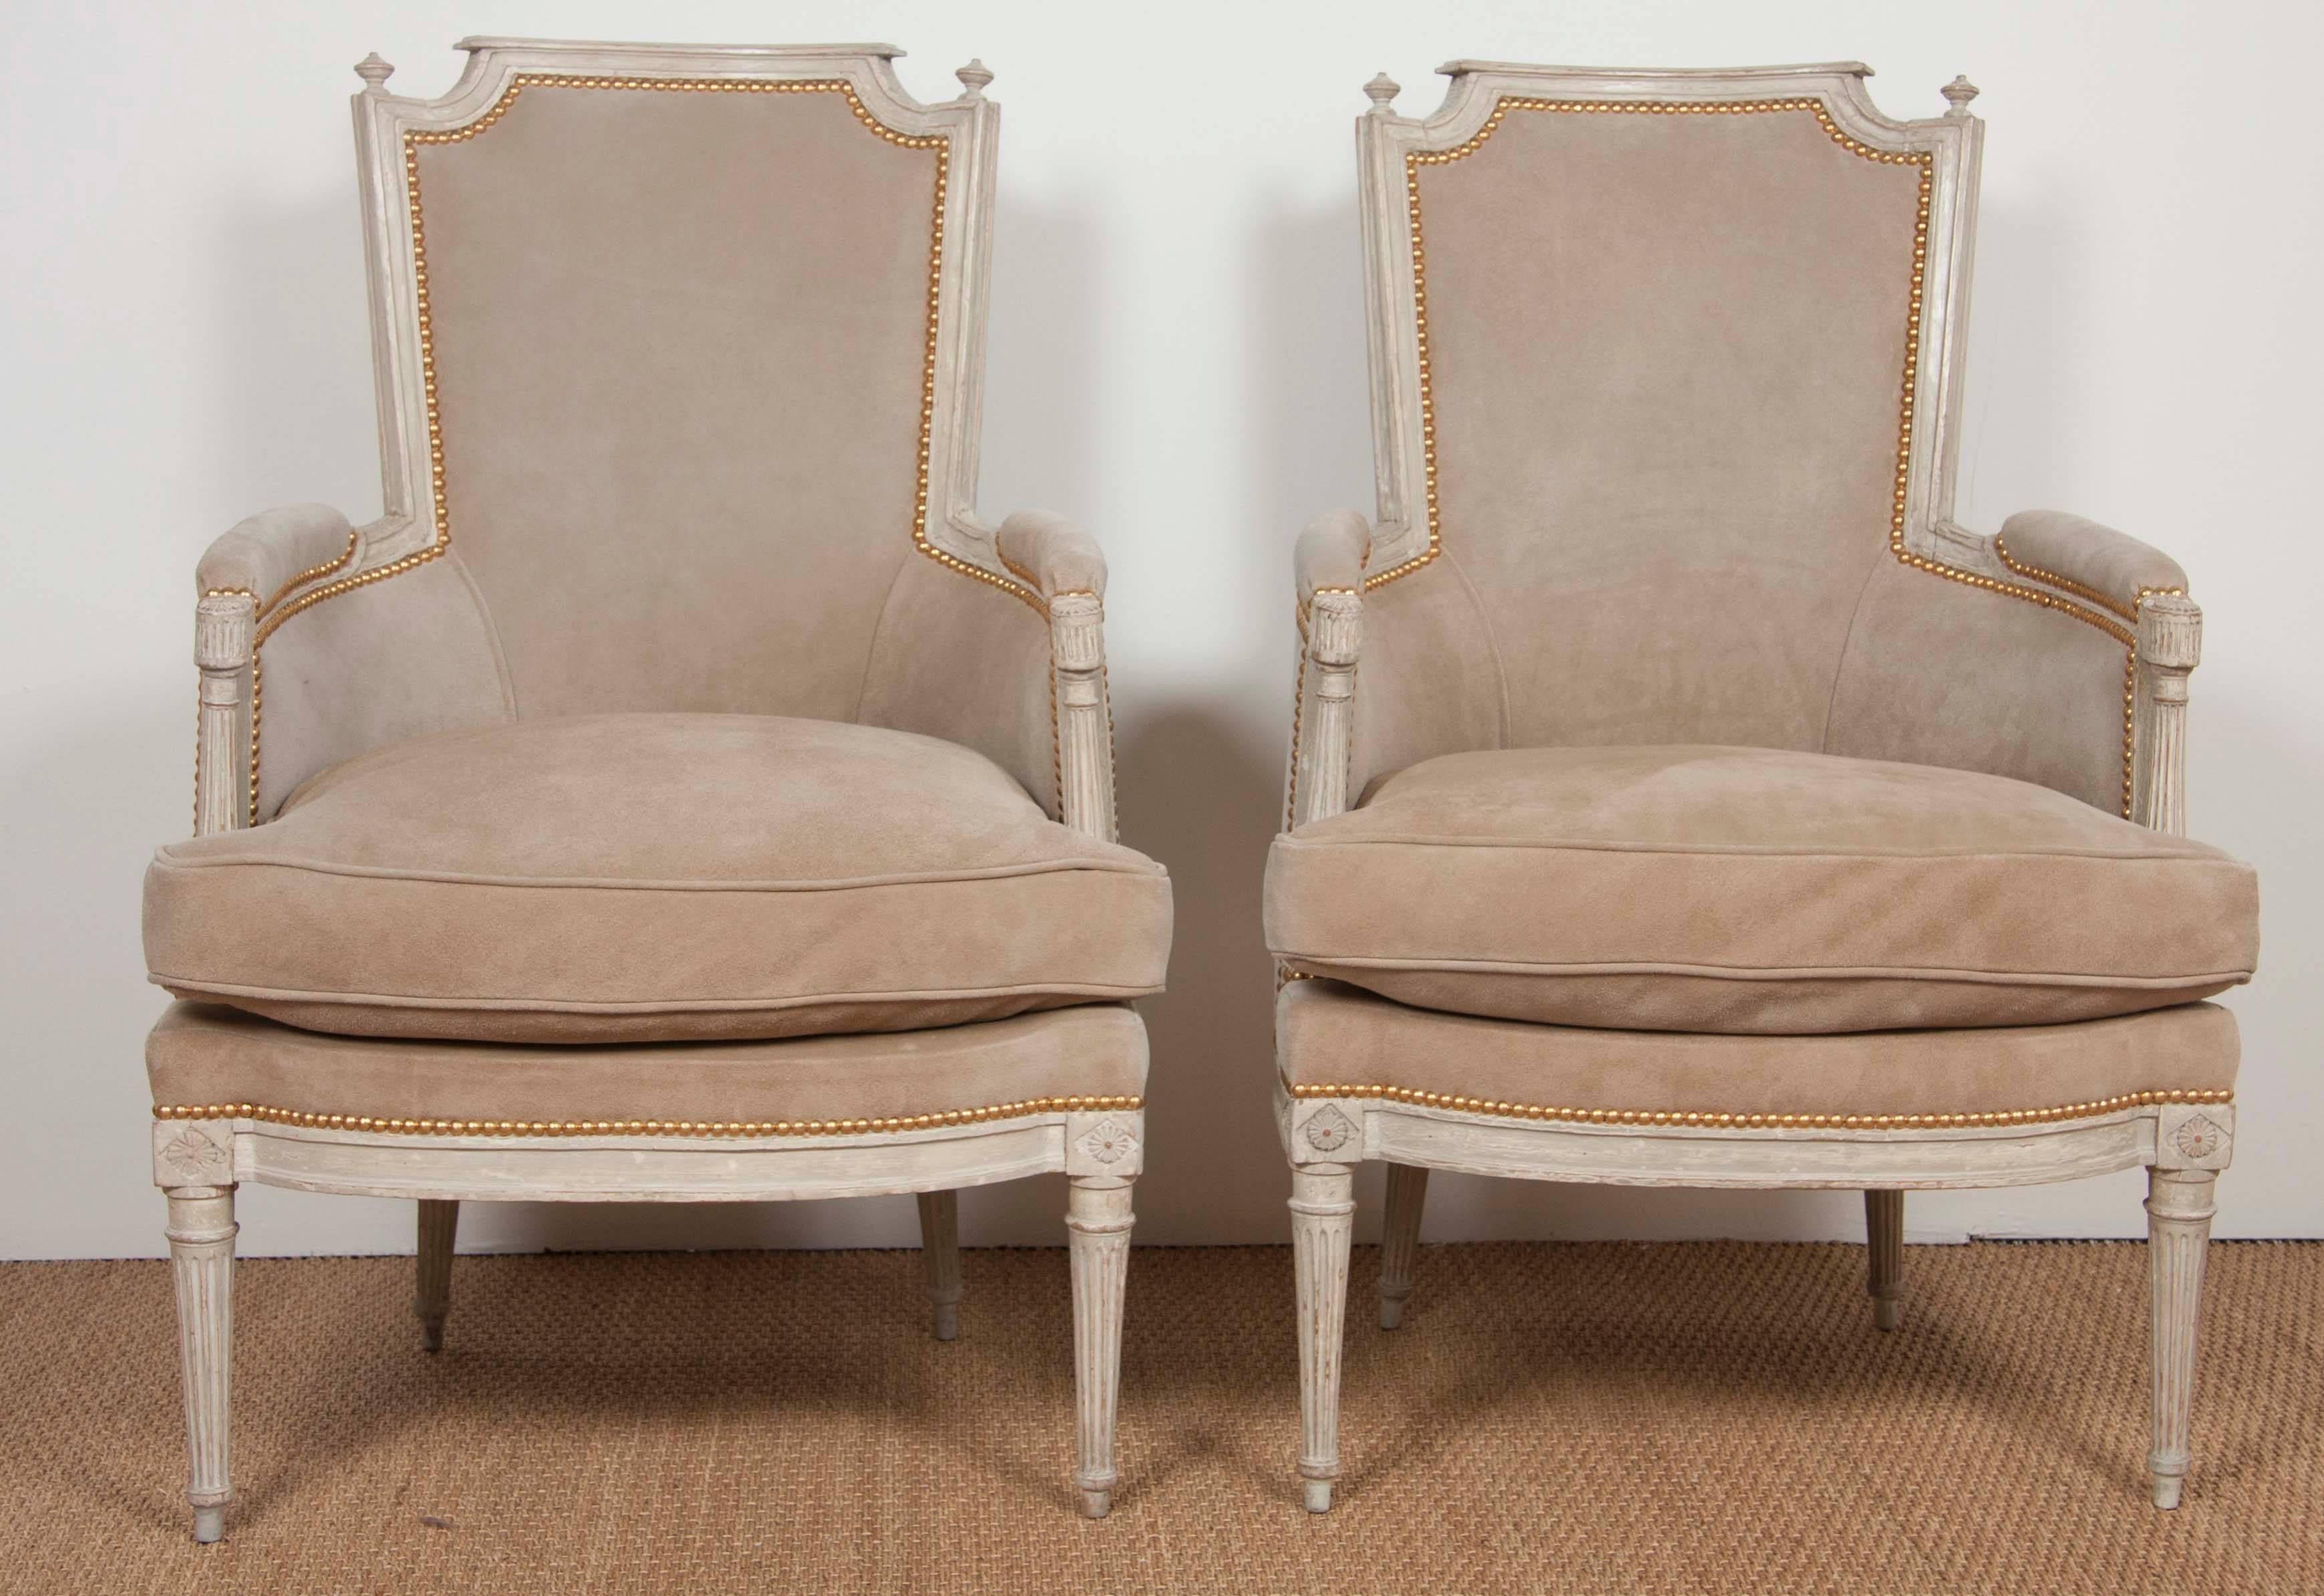 A late 18th-early 19th century pair of Swedish bergere form painted chairs now smoothed and waxed.